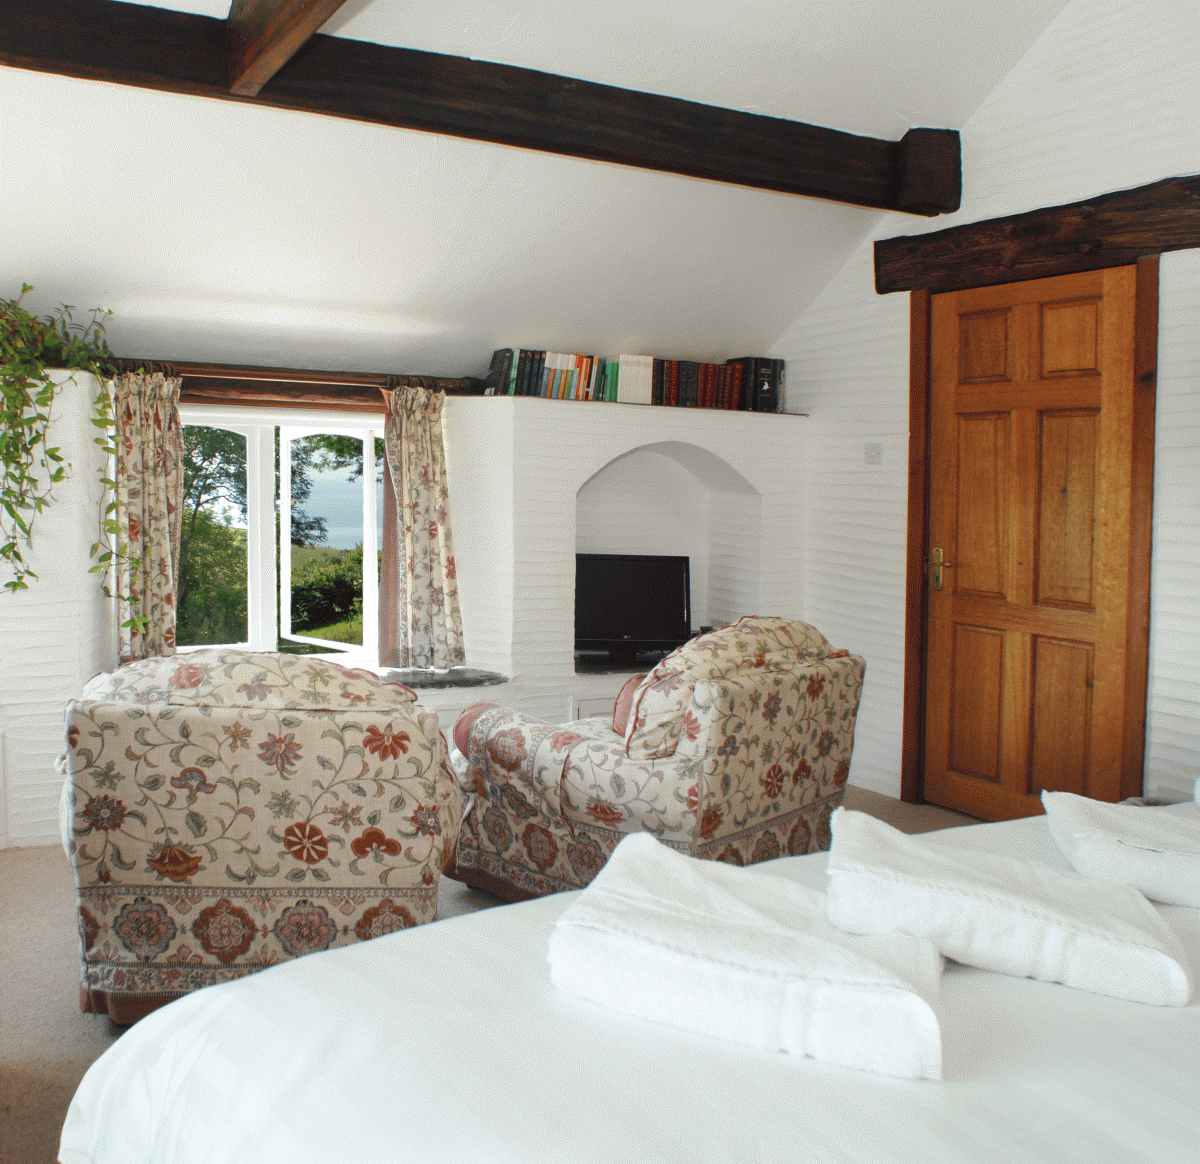 Most bedrooms are doubles with sea and country views